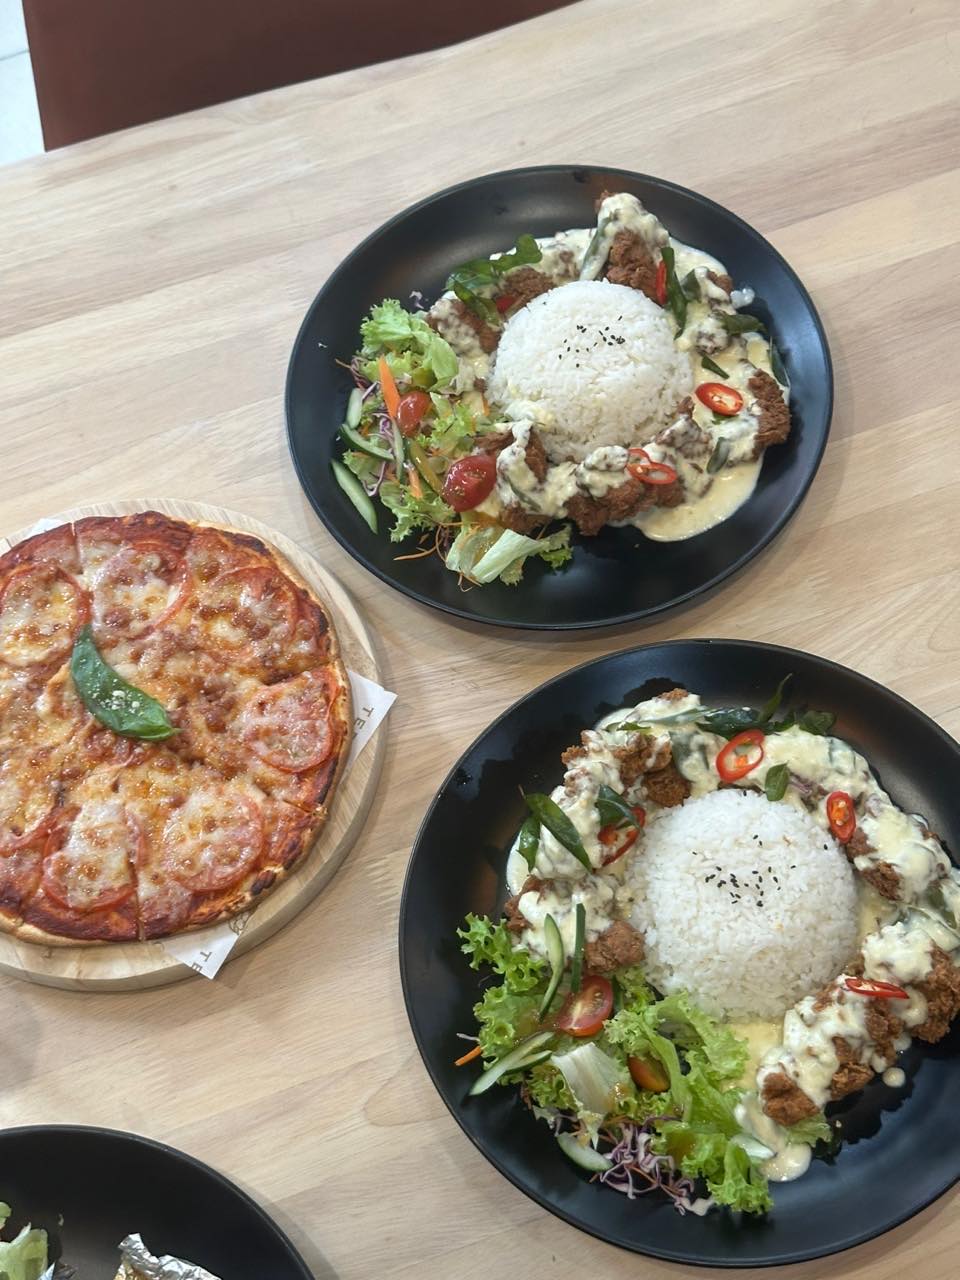 Buttermilk chicken rice and pizza served on a table